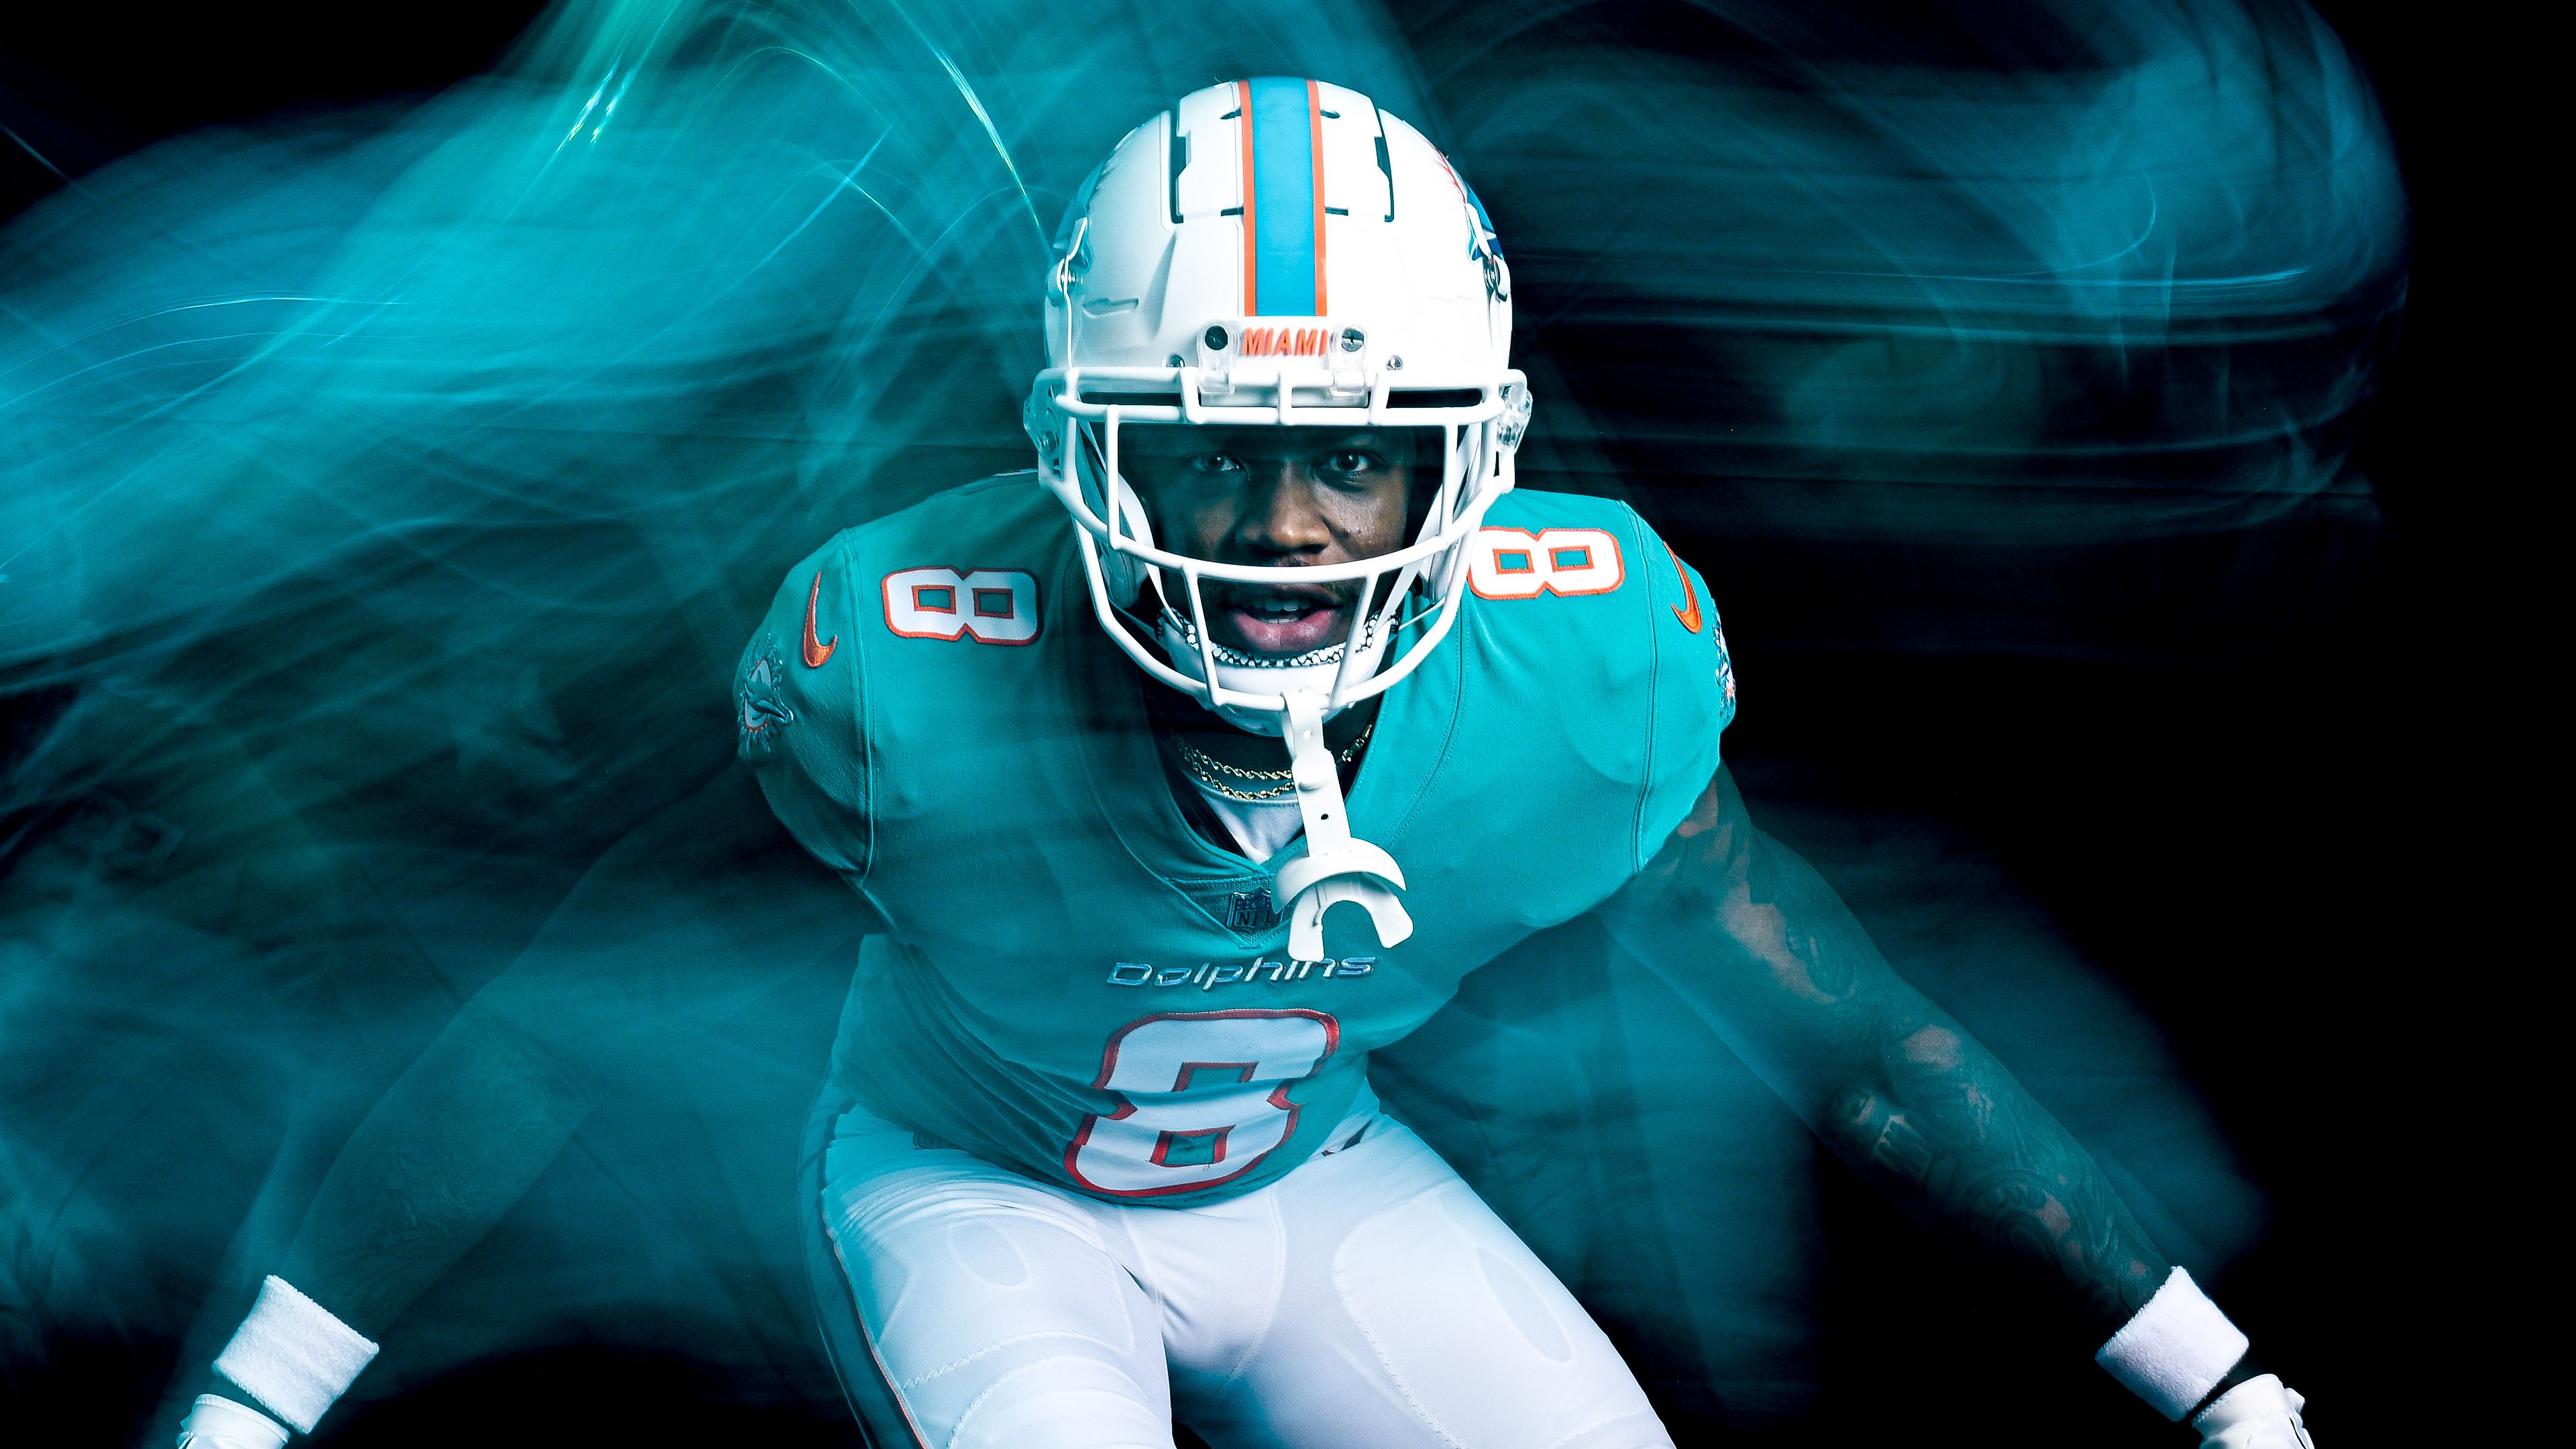 Dolphins Wallpaper. Miami Dolphins